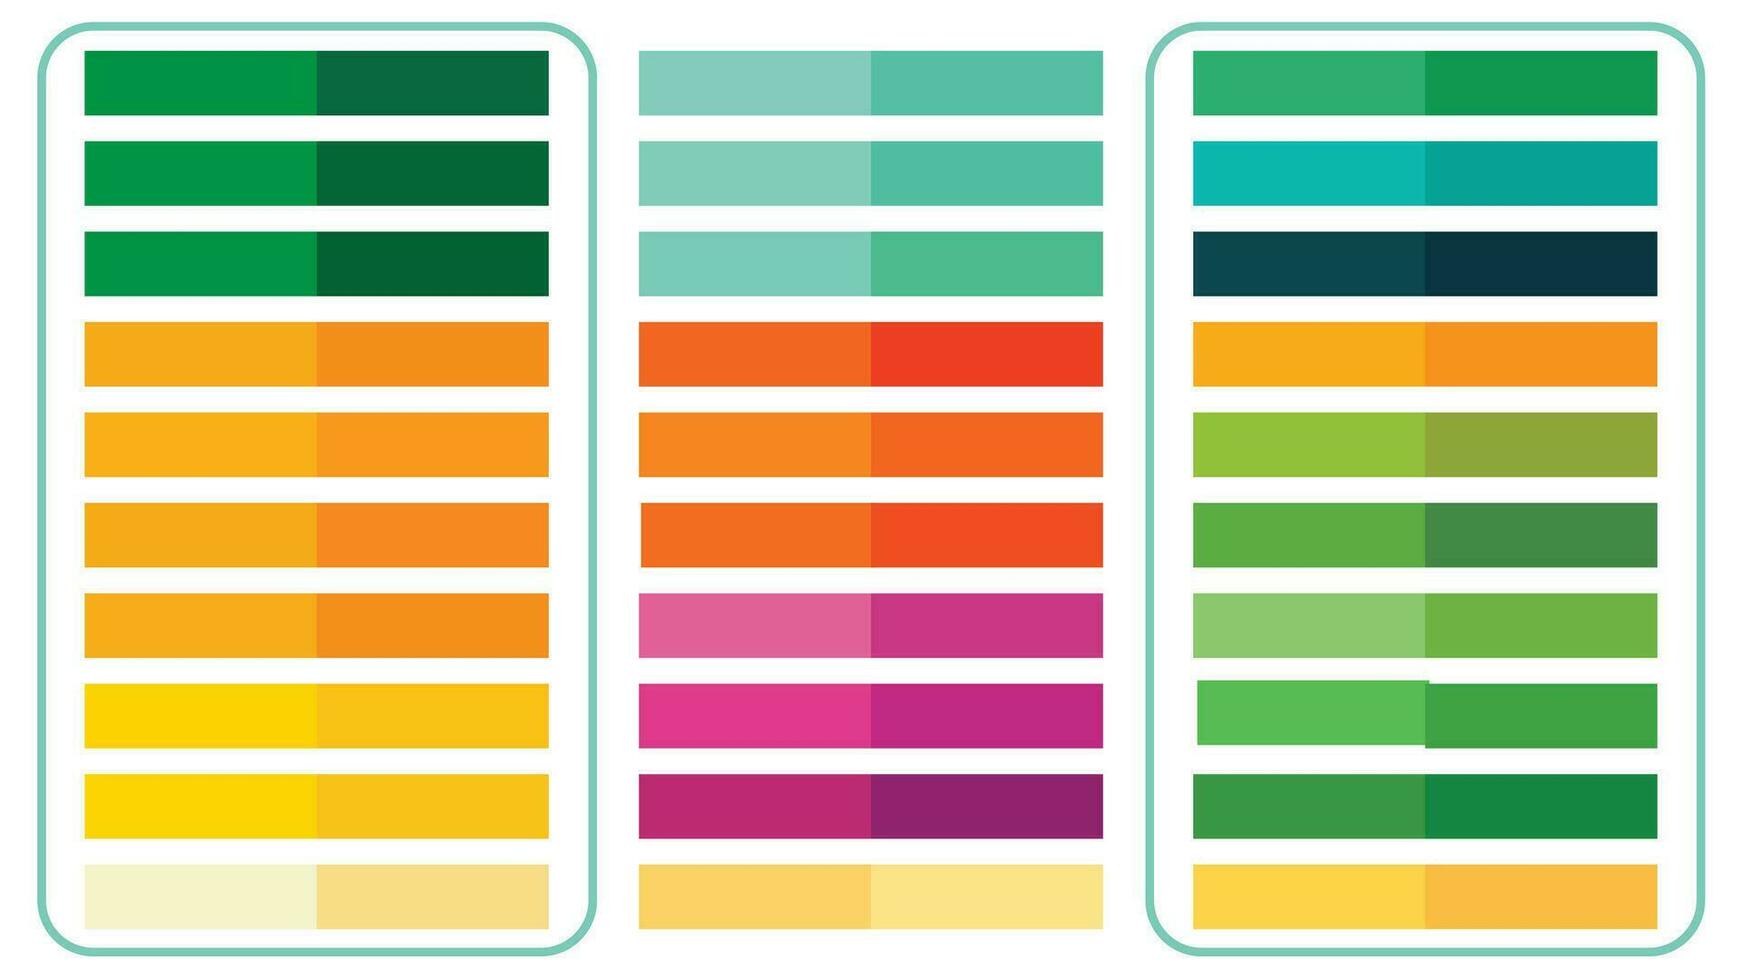 Vibrant RGB spectrum with warm and cool tones in a flat design vector